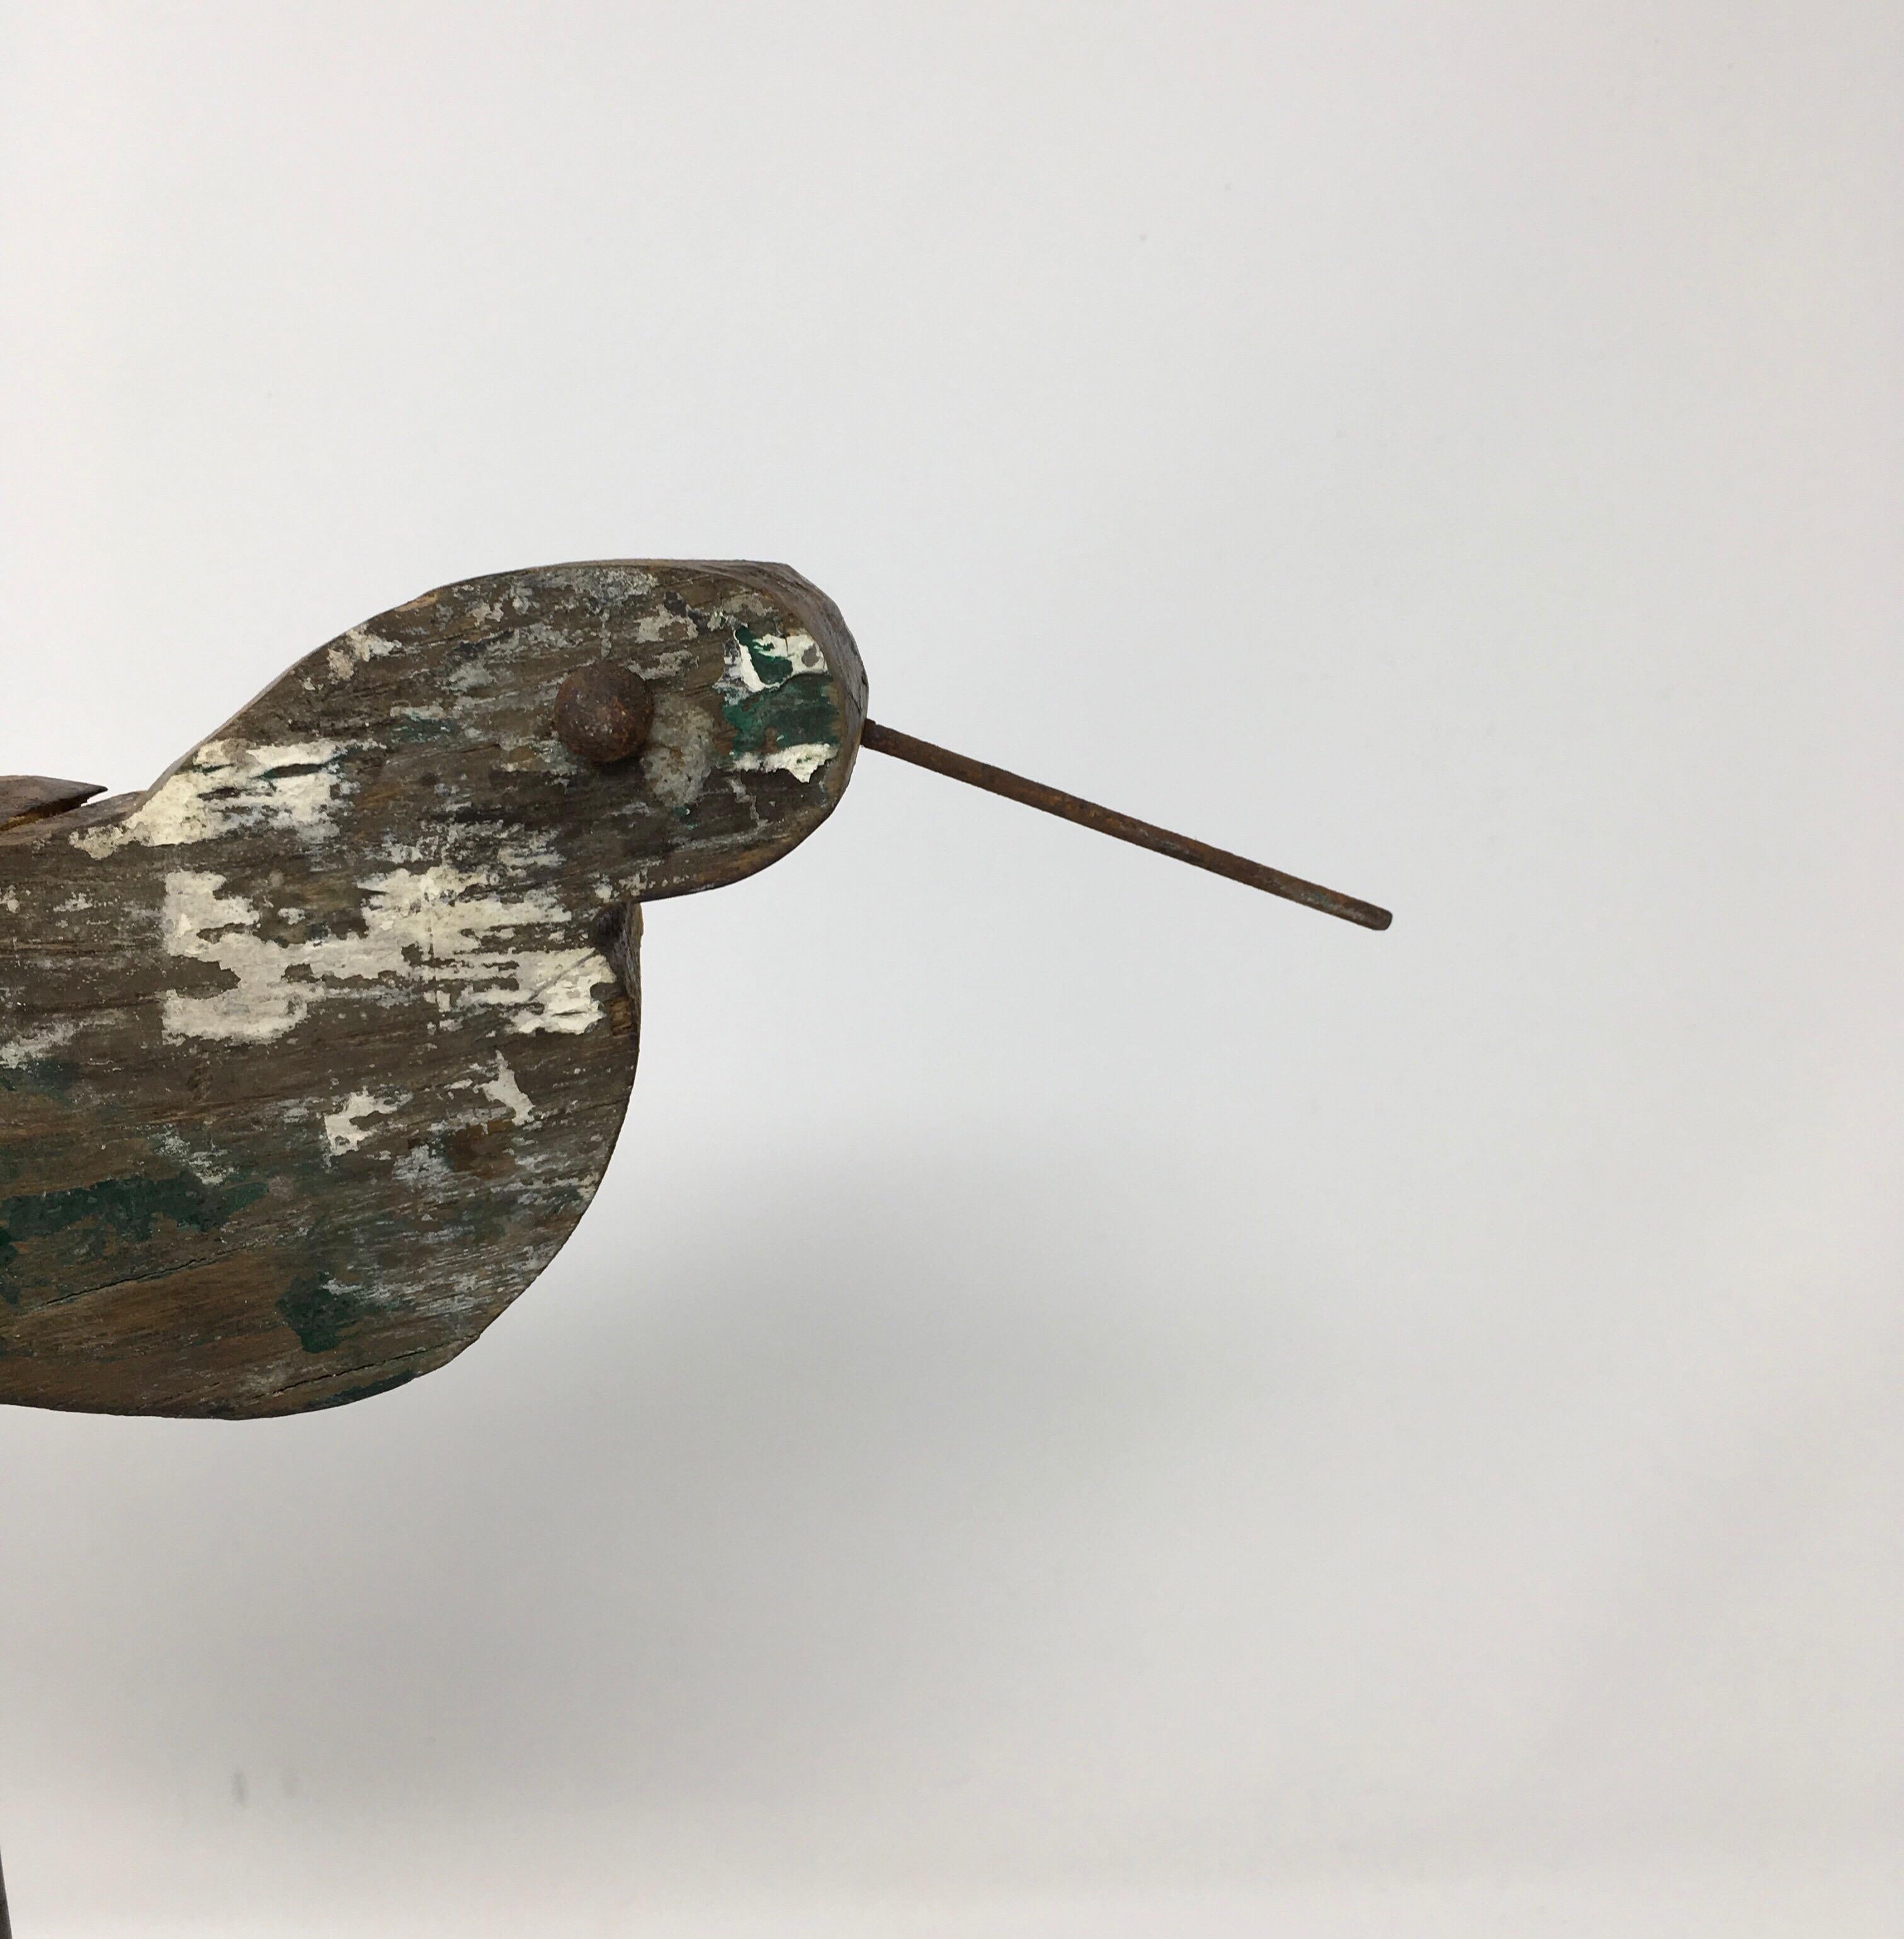 Found in the Provence Region of France, this antique handmade bird decoy is mounted on a new custom iron base. The eyes on this decoy are constructed with metal rivets. Today, these types of bird decoys add interest displayed on tables and